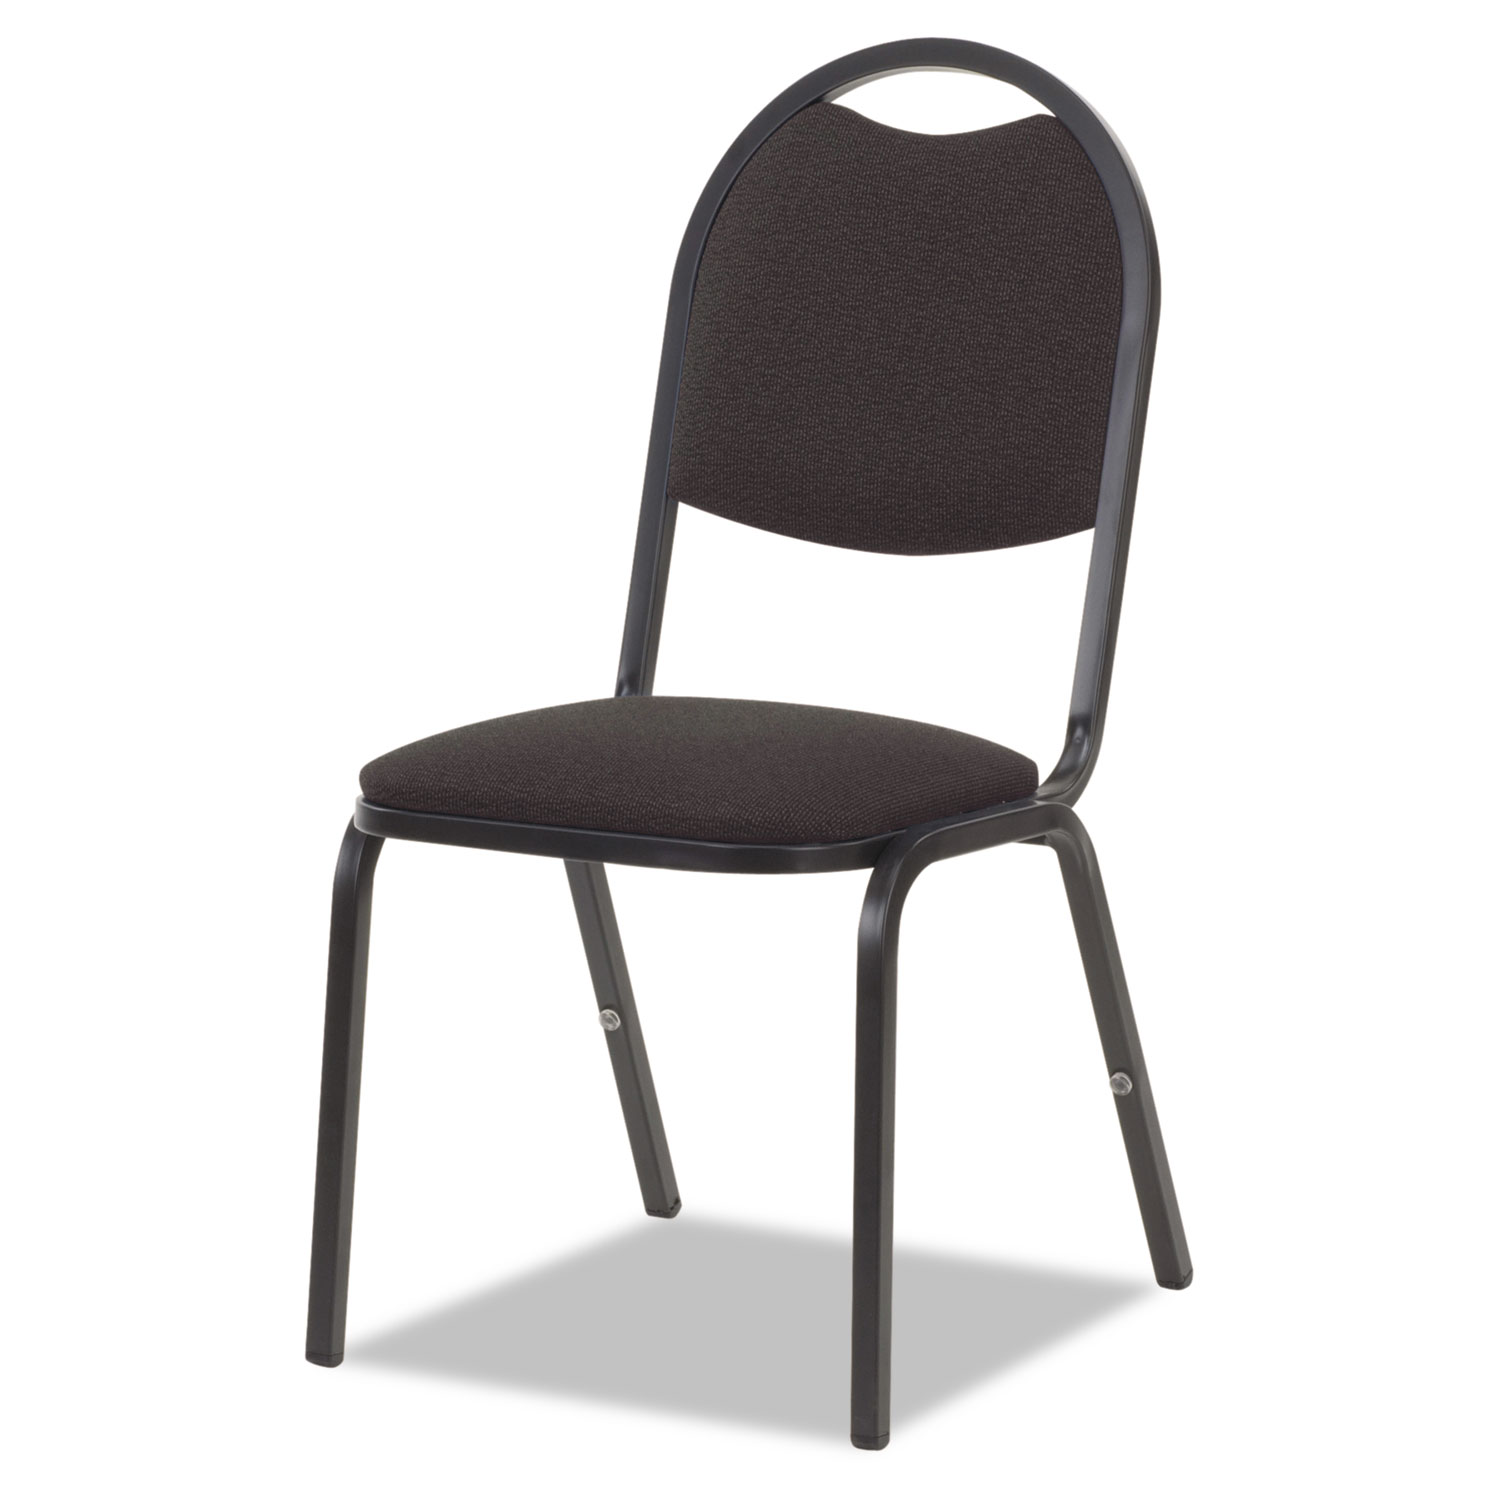 8917 Series Fabric Upholstered Stack Chair, 18w x 22d x 35-1/2h, Black, 4/Carton